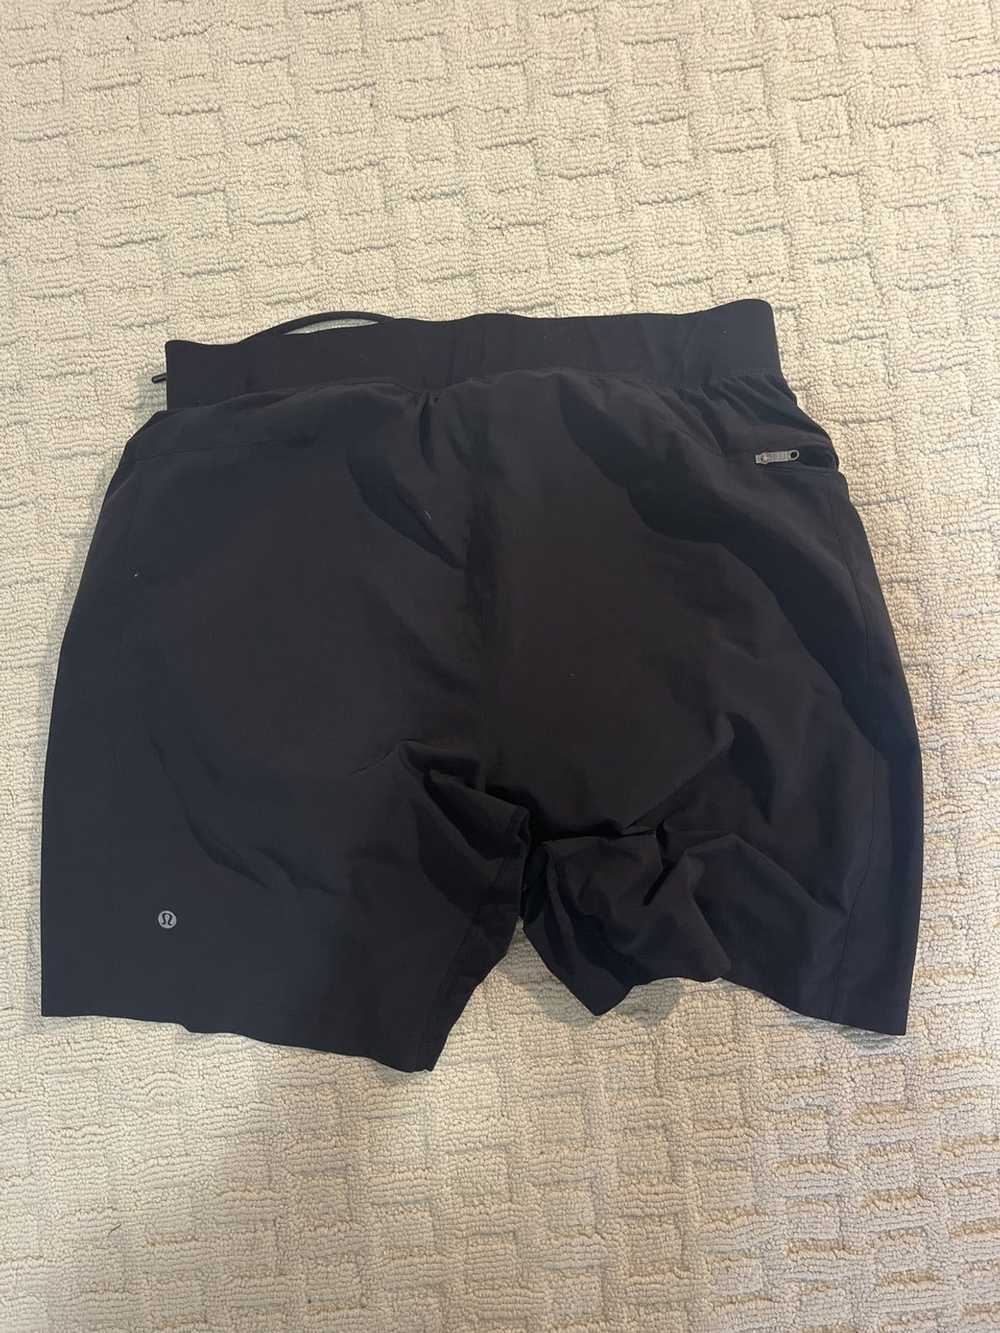 Lululemon Black lily shorts 7 inch inseam with liners - Gem